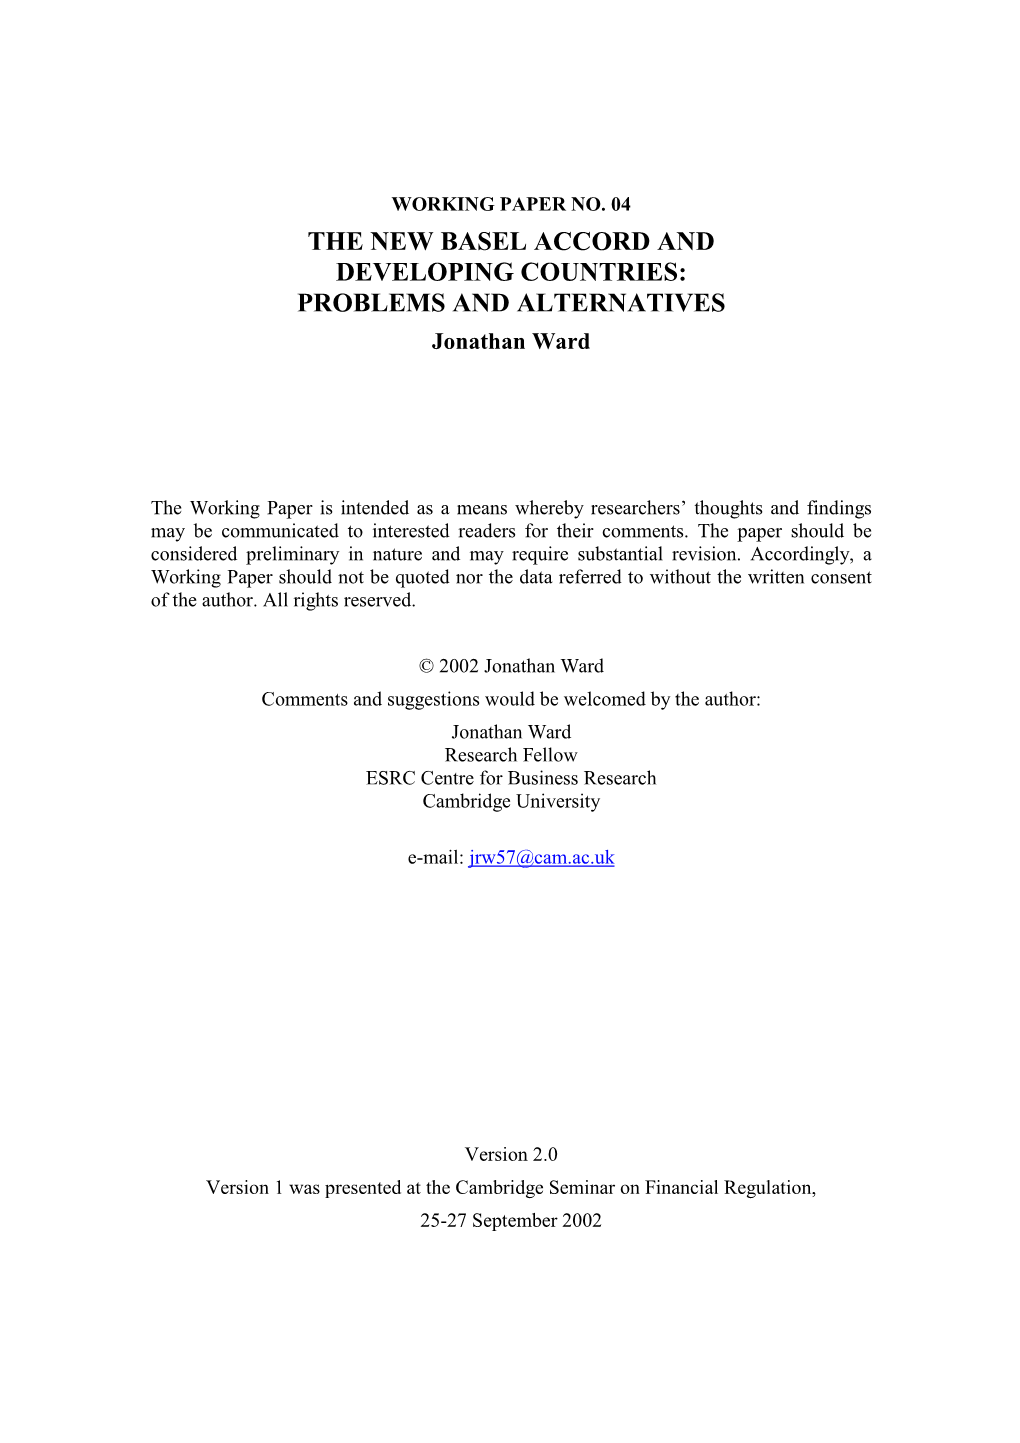 THE NEW BASEL ACCORD and DEVELOPING COUNTRIES: PROBLEMS and ALTERNATIVES Jonathan Ward